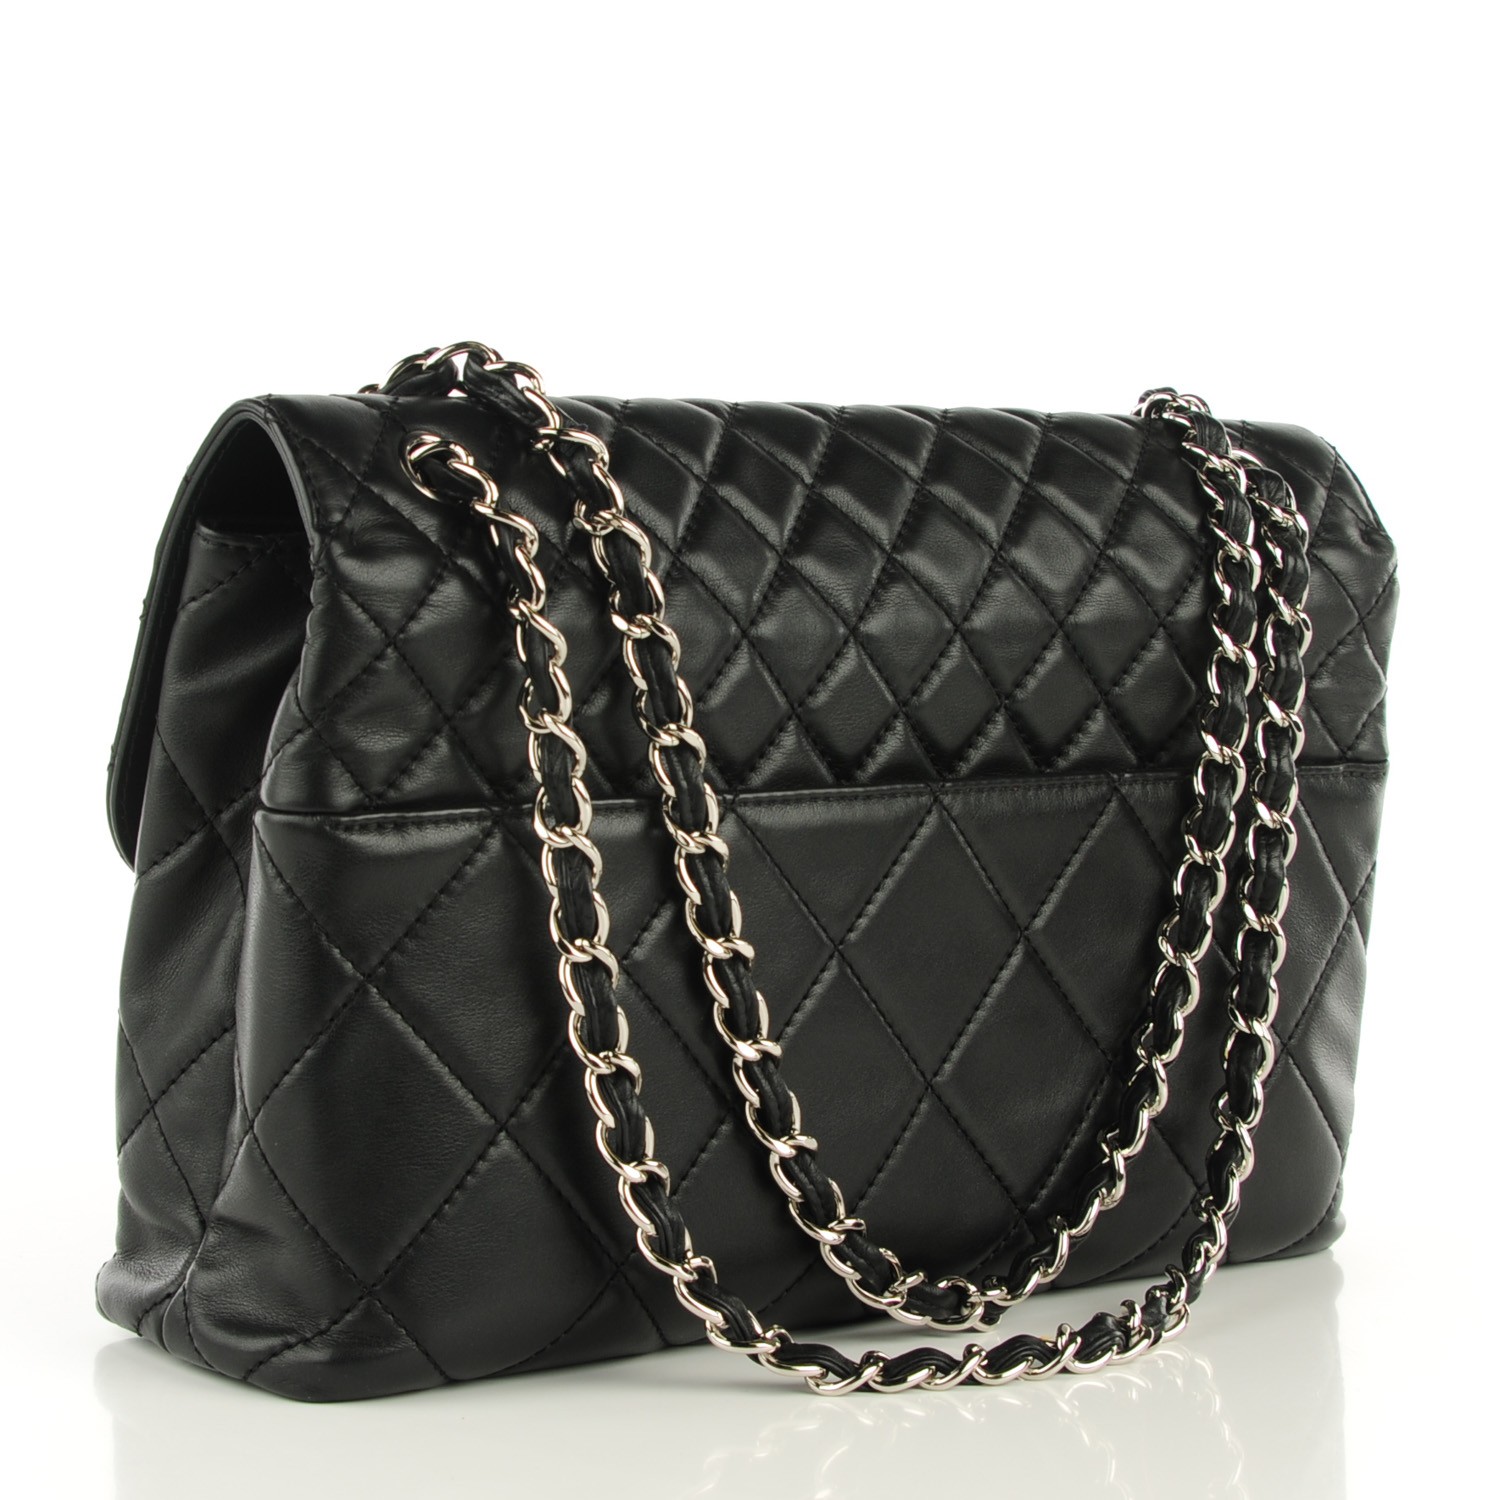 CHANEL Calfskin Quilted In The Business Flap Bag Black 151073